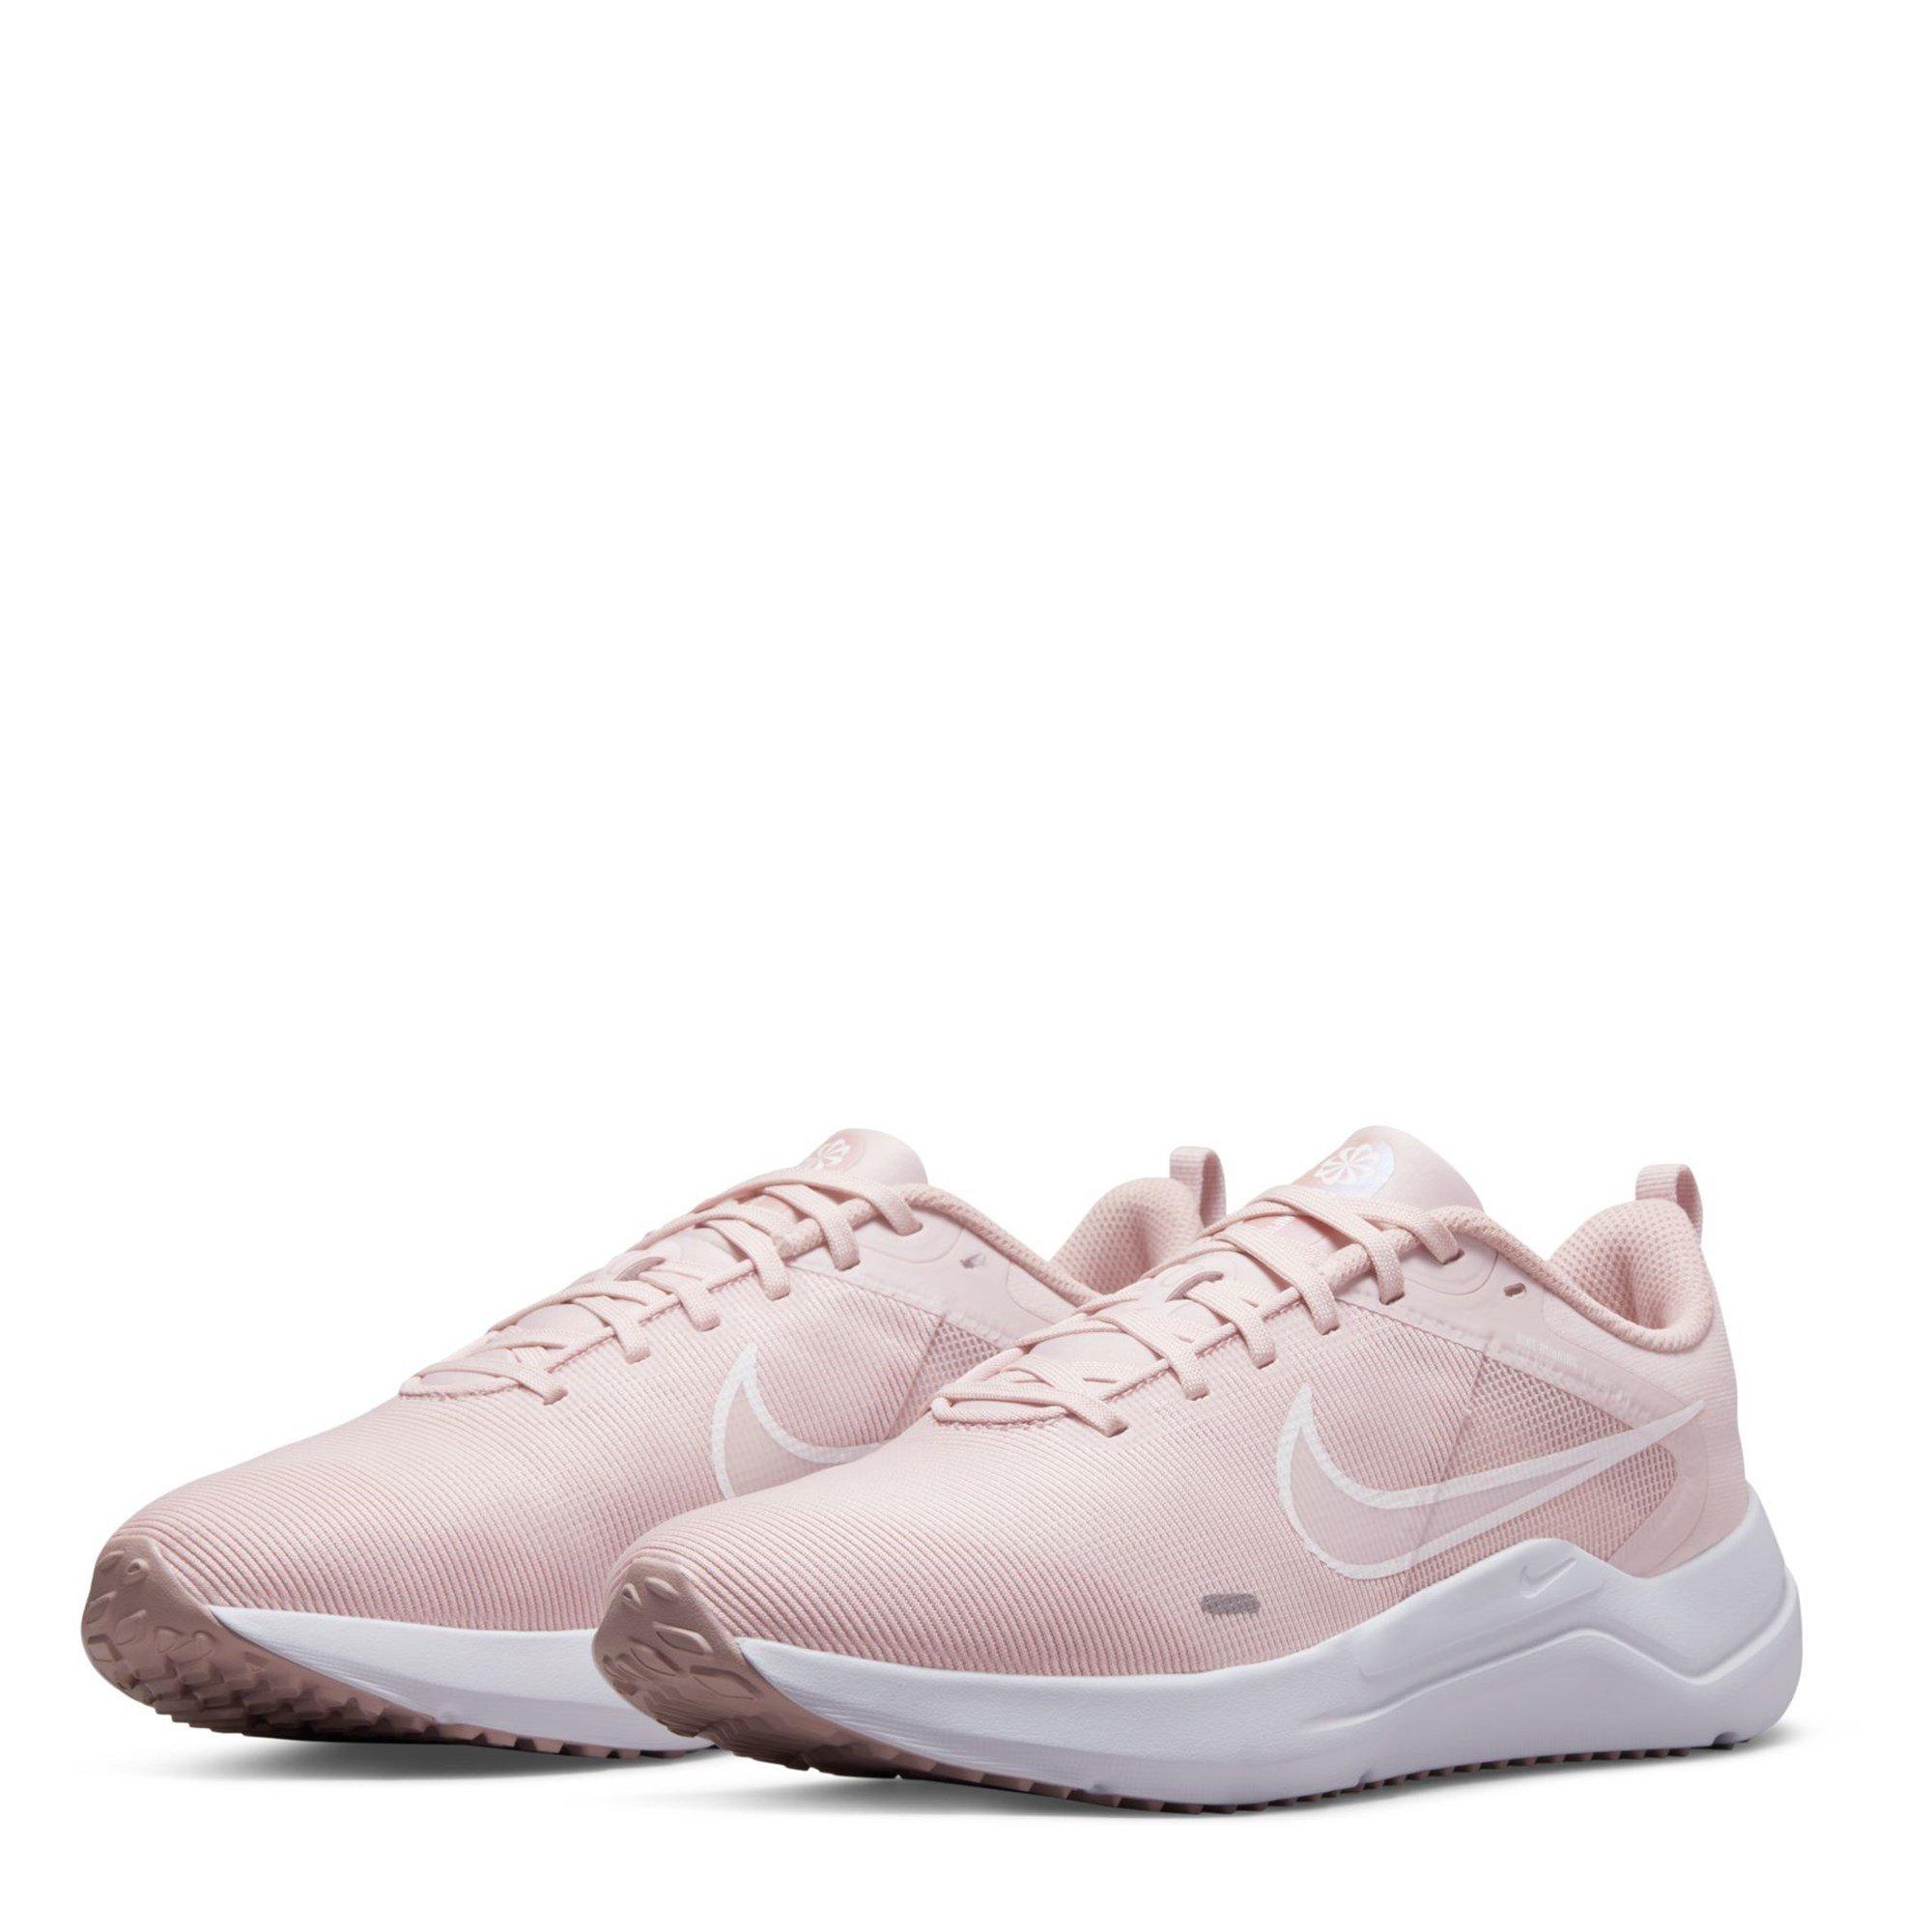 Nike | Downshifter 12 Womens Shoes | Runners | Sports Direct MY